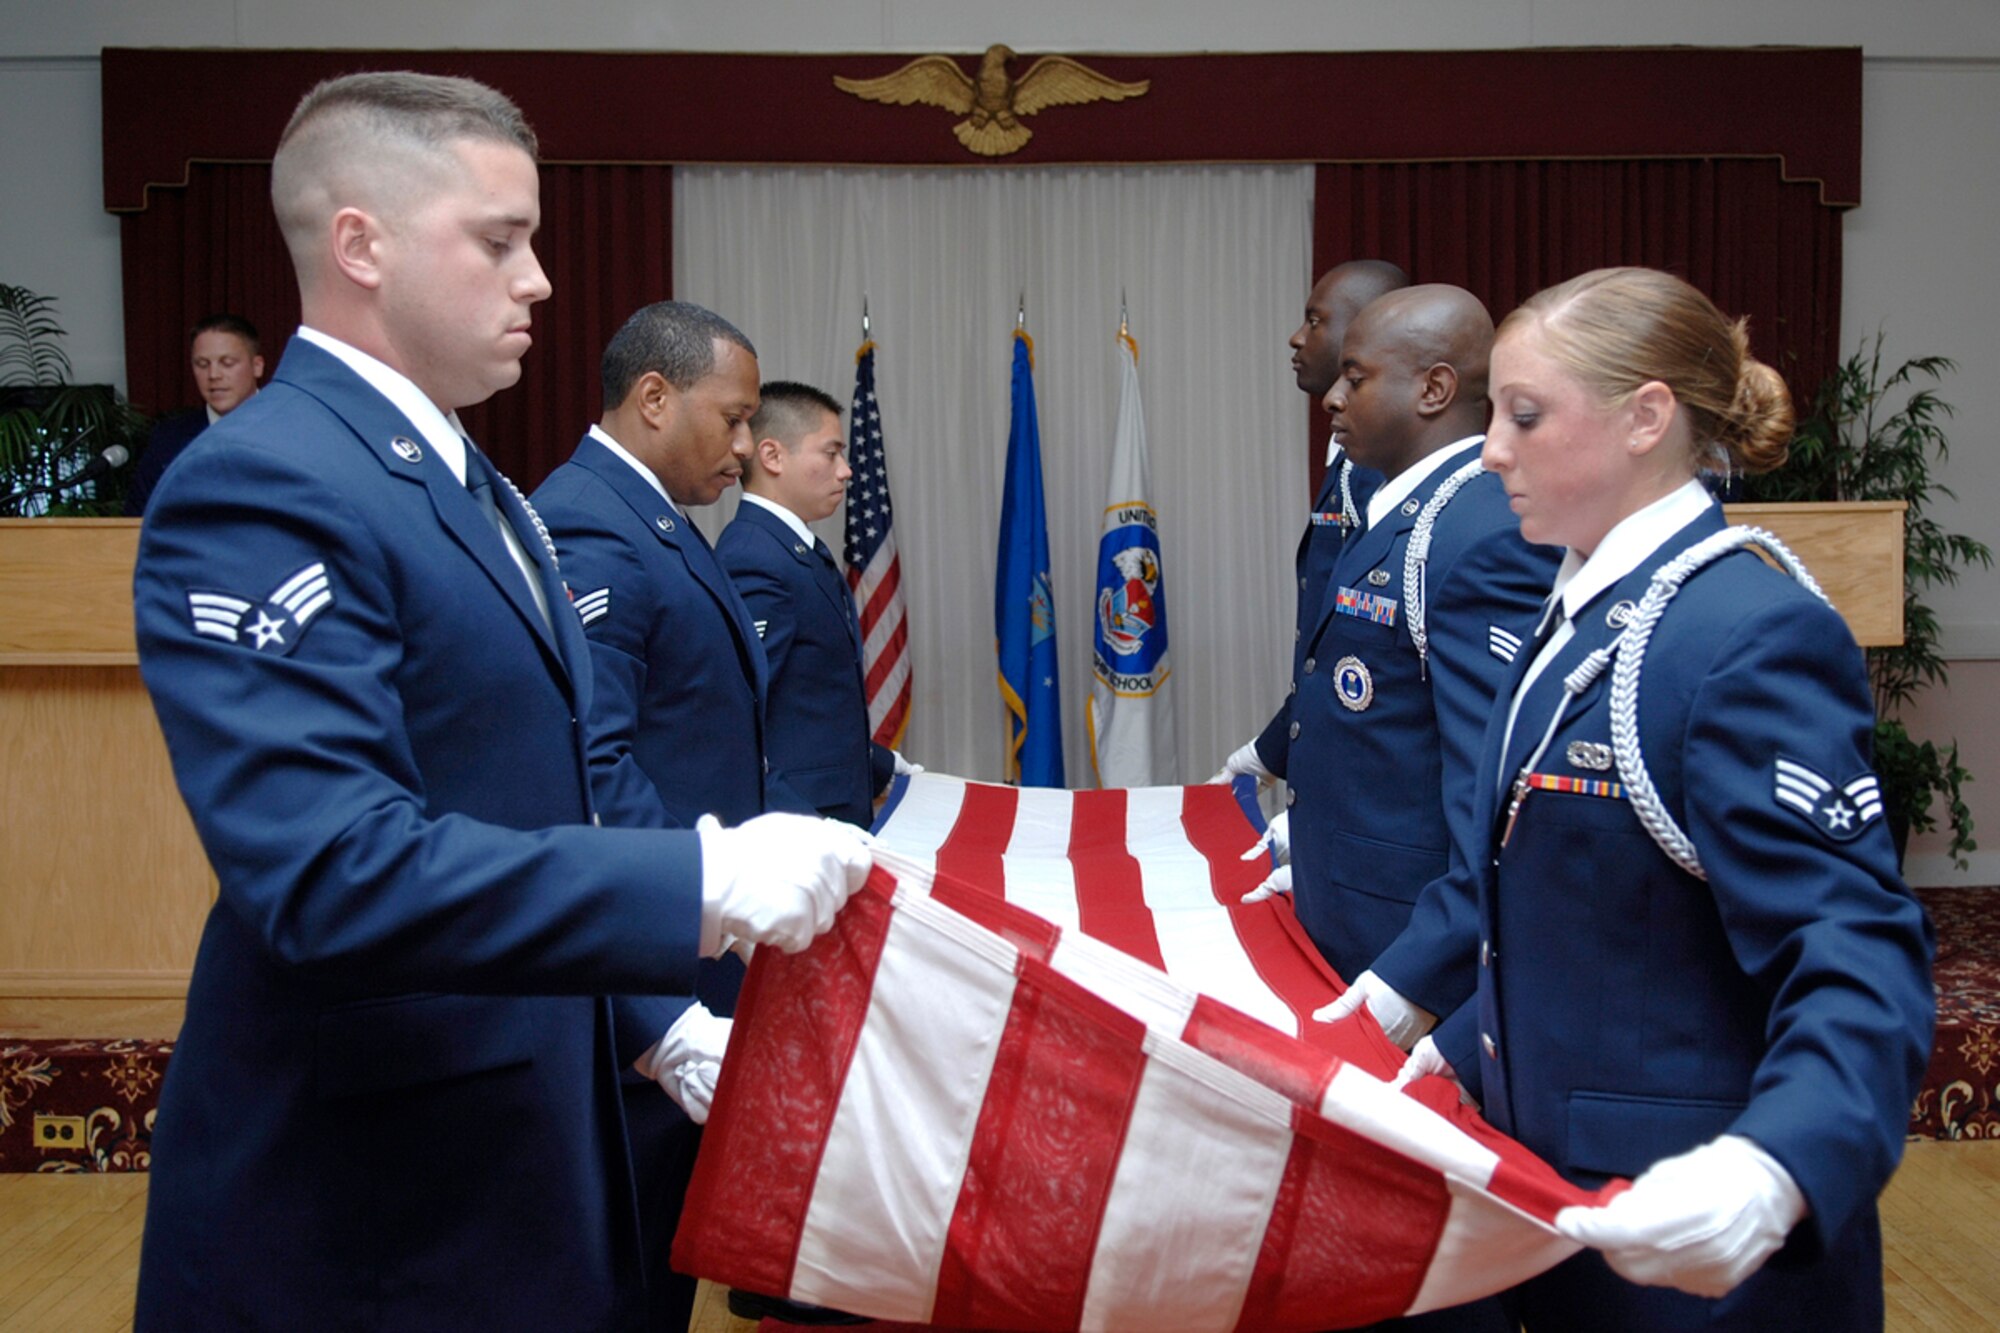 From left, left line: Senior Airmen Brett J. Reed, Aaron E. Minor, Prudencio Olmos, and From right, right line: Senior Airmen Michelle K. Urso, Thomas J. Credit and Evans O. Opoku participate in a flag folding ceremony conducted during the Airman Leadership School graduation held July 27 in the Minuteman Club. Eleven servicemembers graduated during the ceremony. The next ALS graduation is scheduled Oct. 5. The five-week ALS course is the first step of Professional Military Education for all enlisted Airmen. The class is required to be taken in residence before servicemembers are promoted to the rank of staff sergeant. (U.S. Air Force photo by Jan Abate). 
